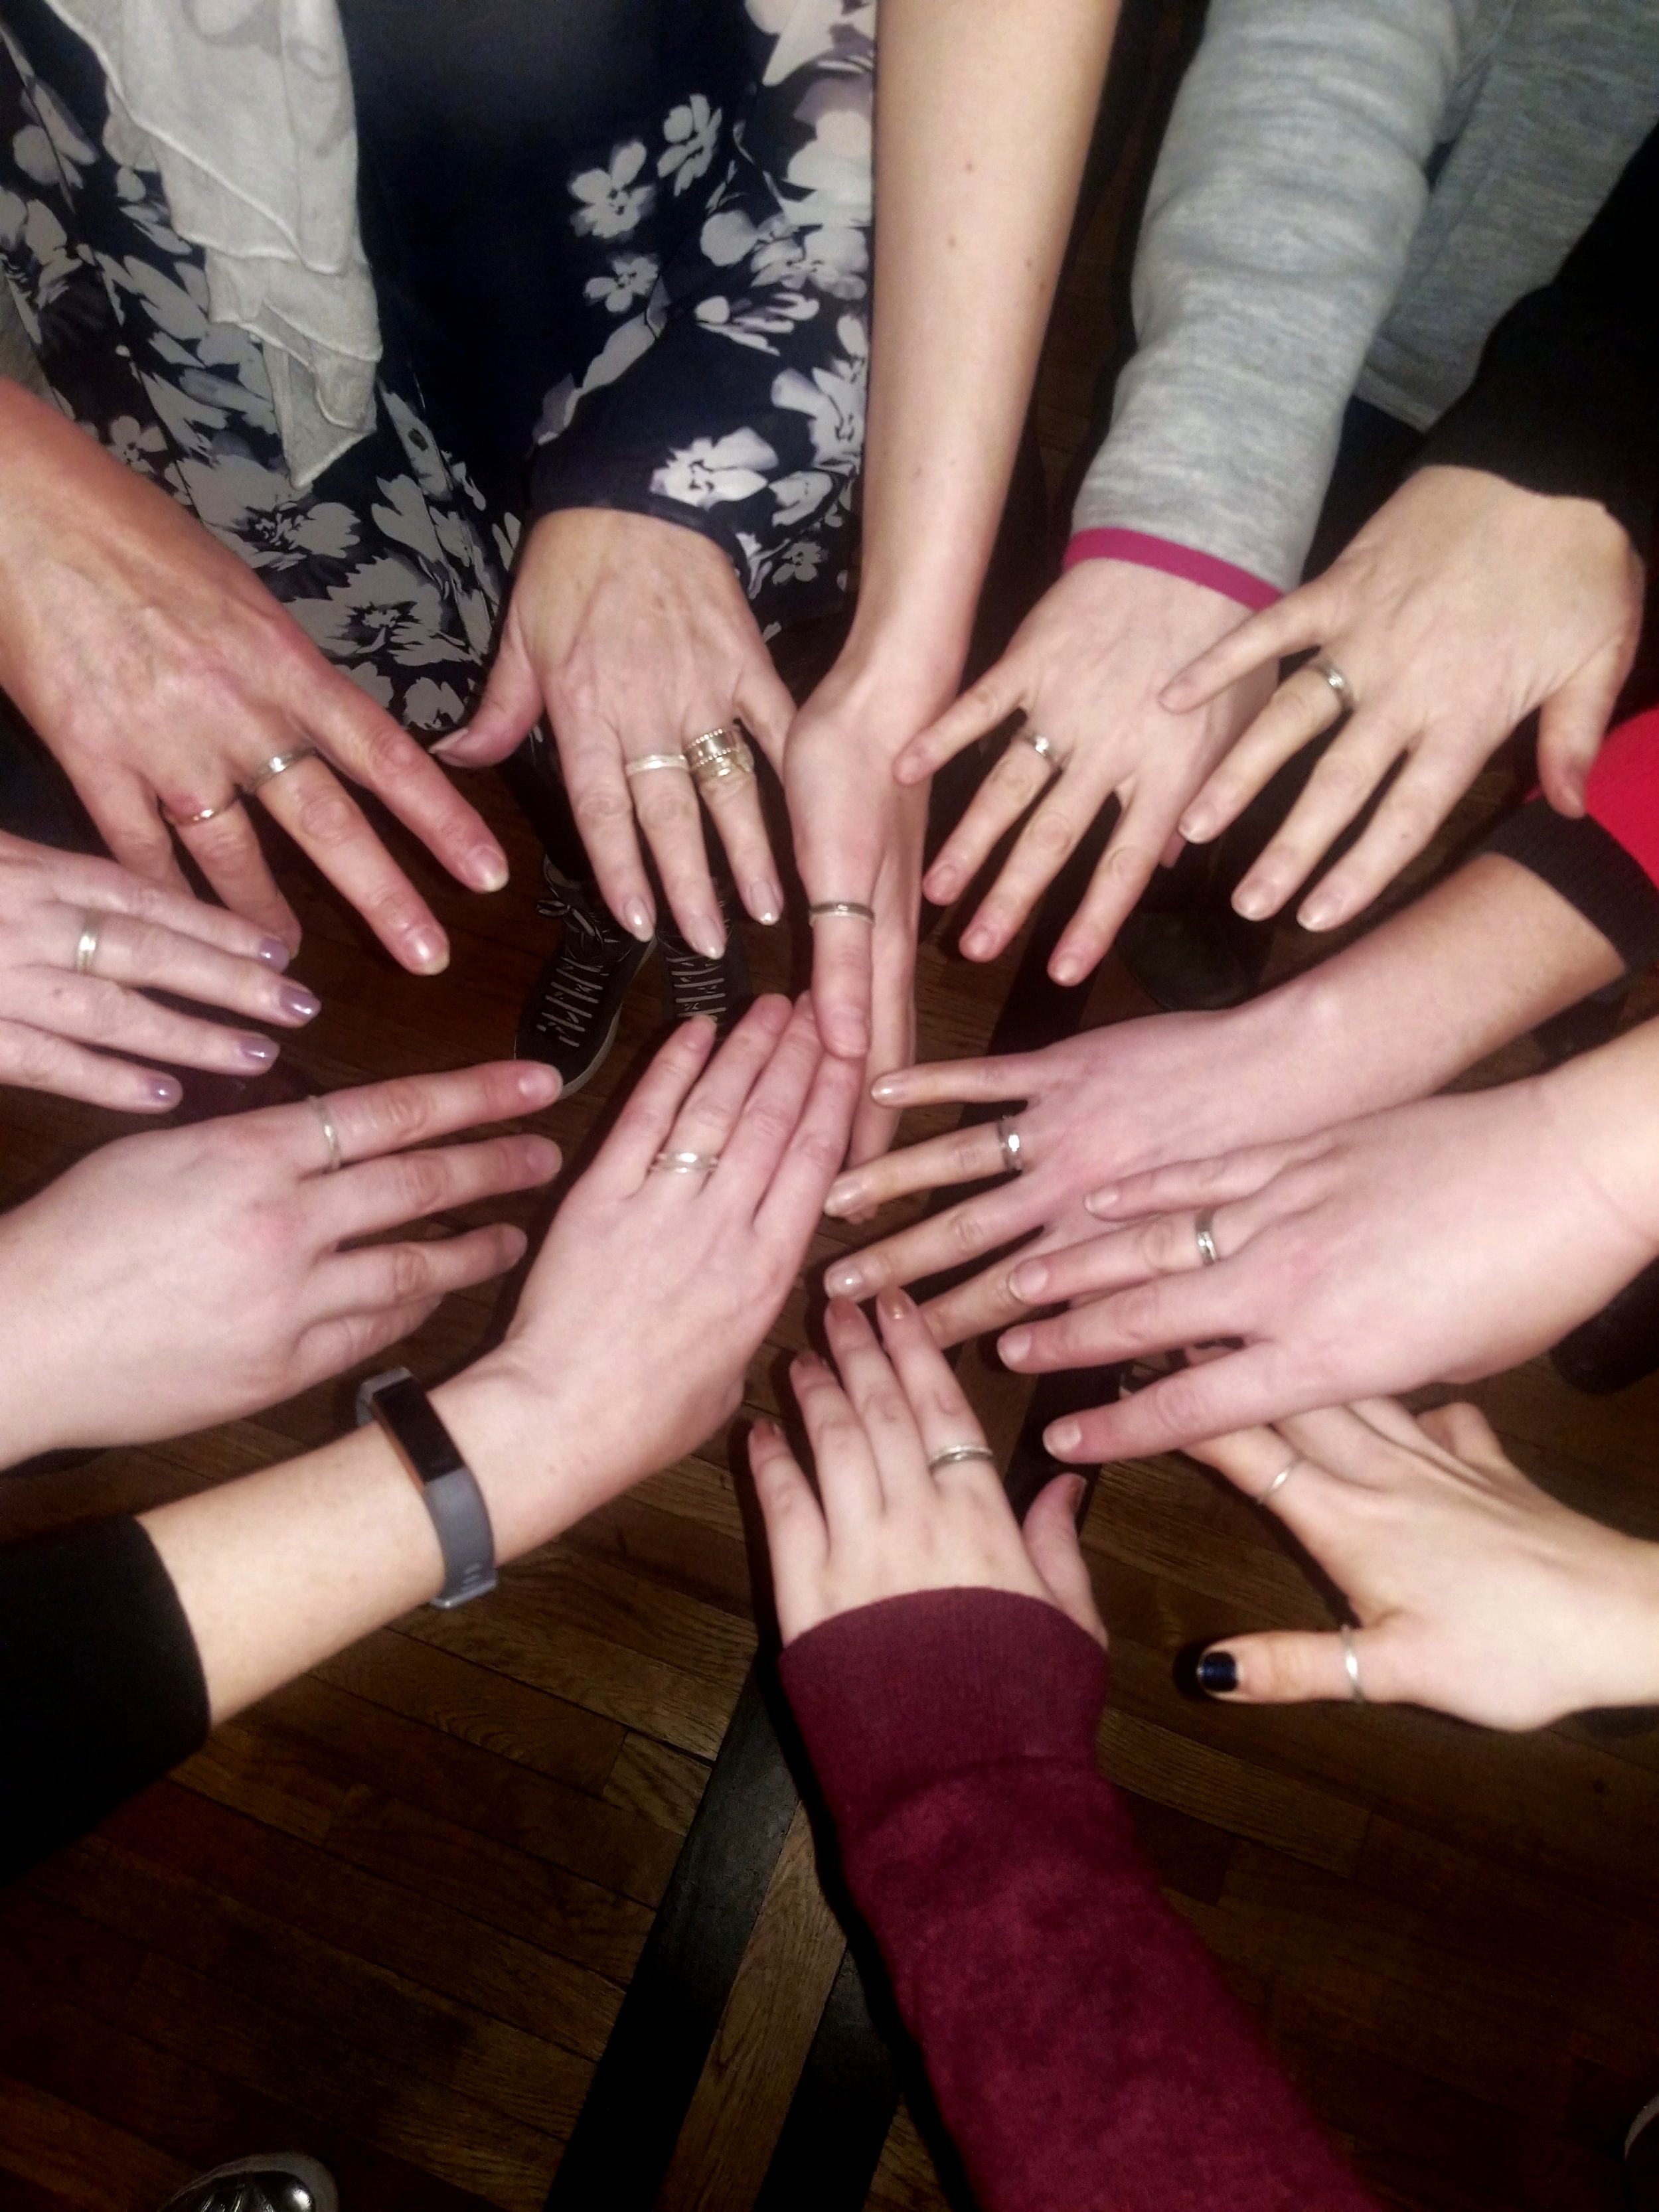 Participants wearing finished handmade silver rings